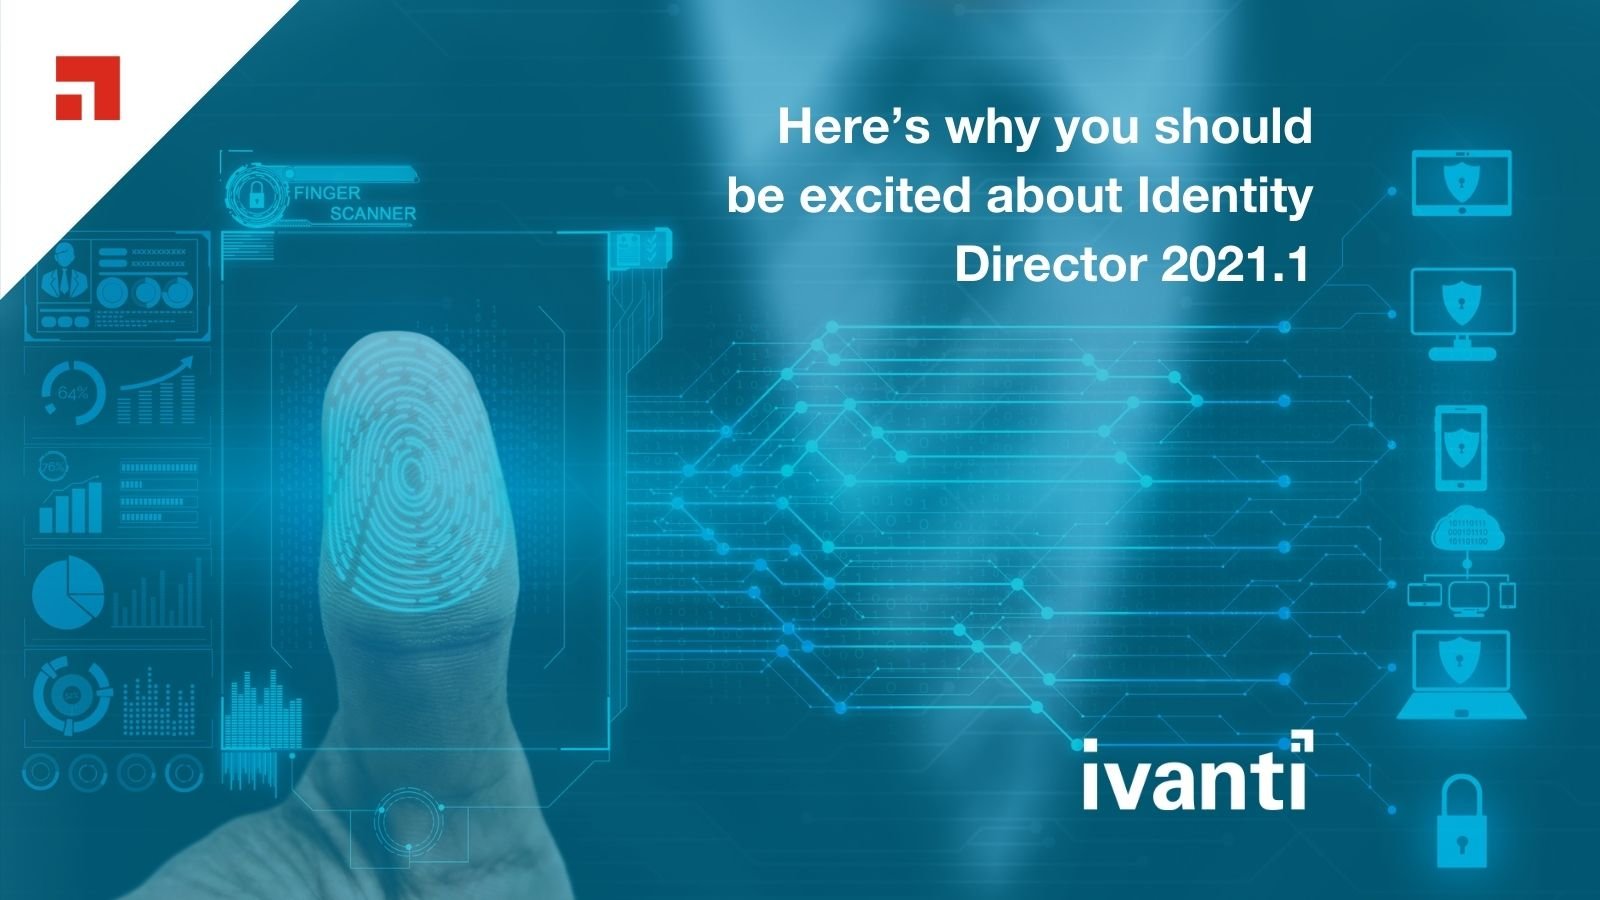 Here's why you should be excited about Identity Director 2021.1